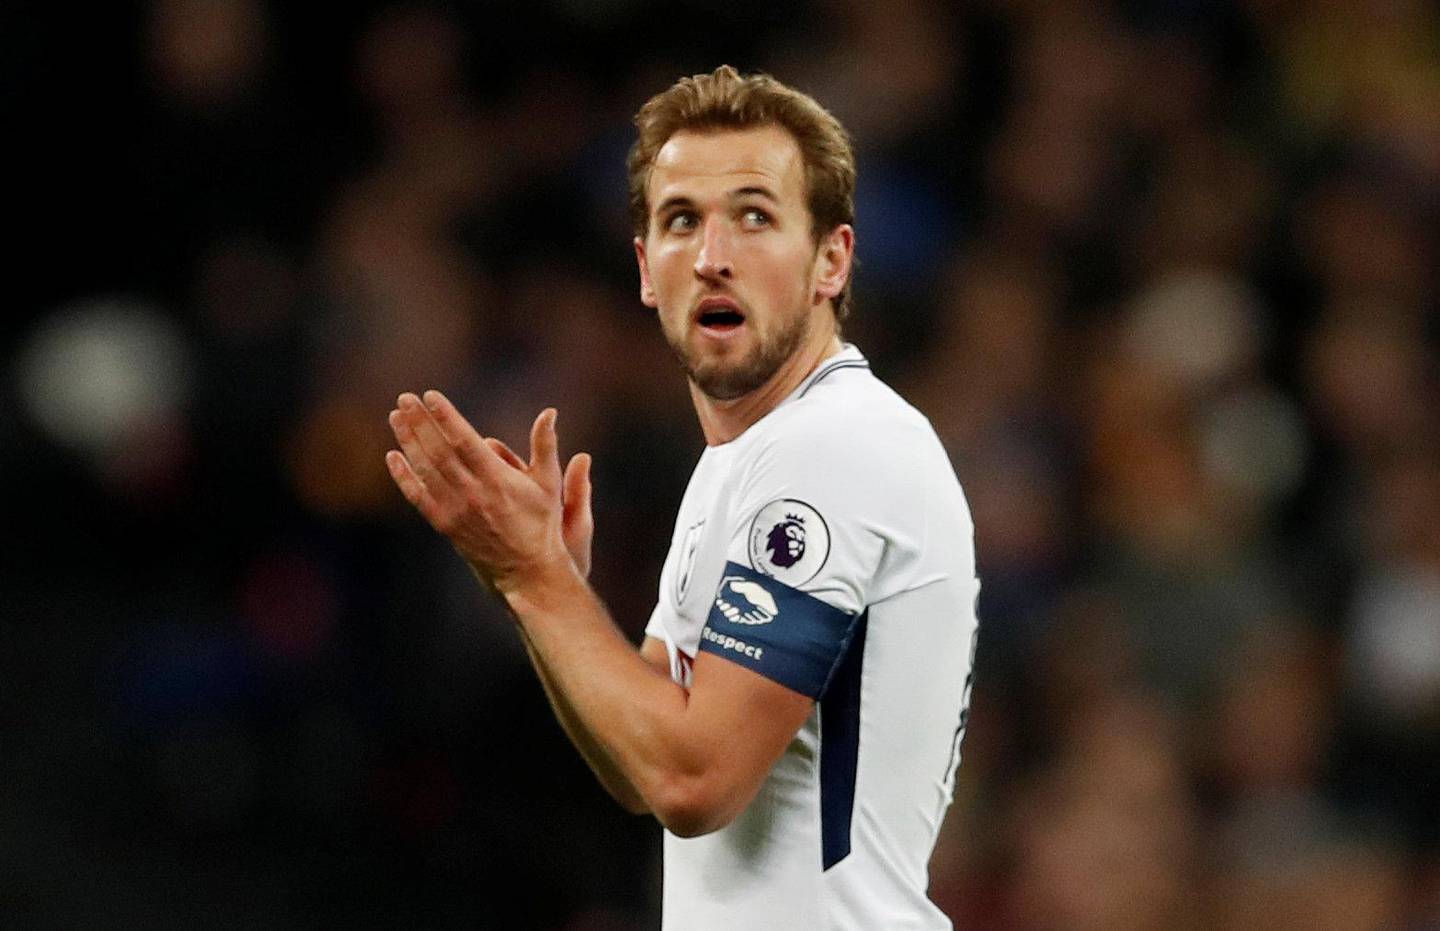 Soccer Football - FA Cup Third Round - Tottenham Hotspur vs AFC Wimbledon - Wembley Stadium, London, Britain - January 7, 2018   Tottenham's Harry Kane applauds fans as he is substituted off                   Action Images via Reuters/Matthew Childs